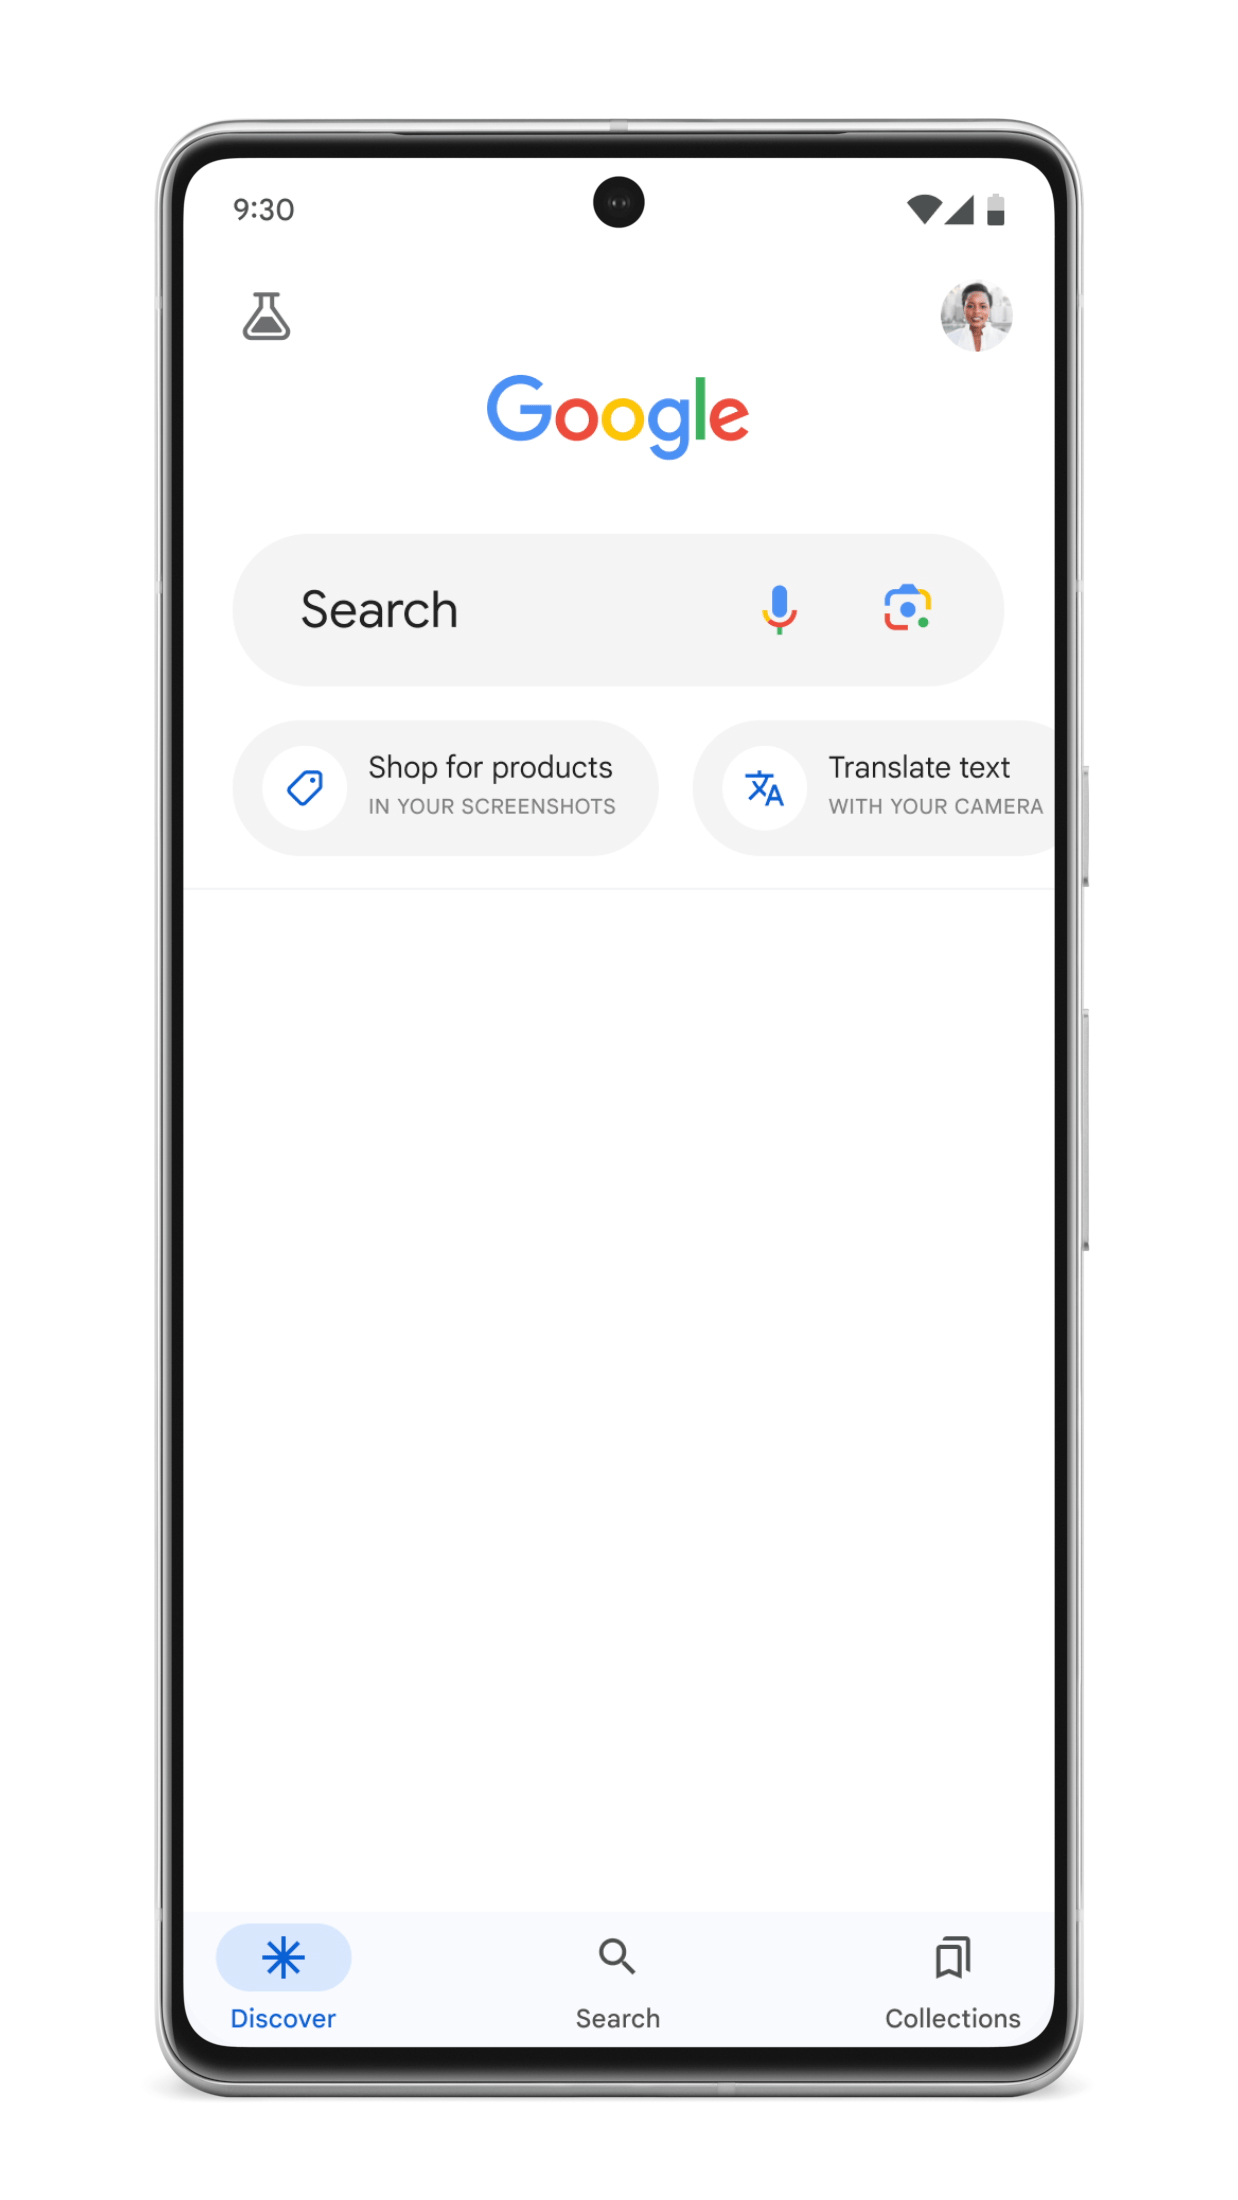 The image is of a smartphone screen displaying the Google search page with a new feature called SGE (Search Generative Experience) as part of an experimental rollout in Search Labs.